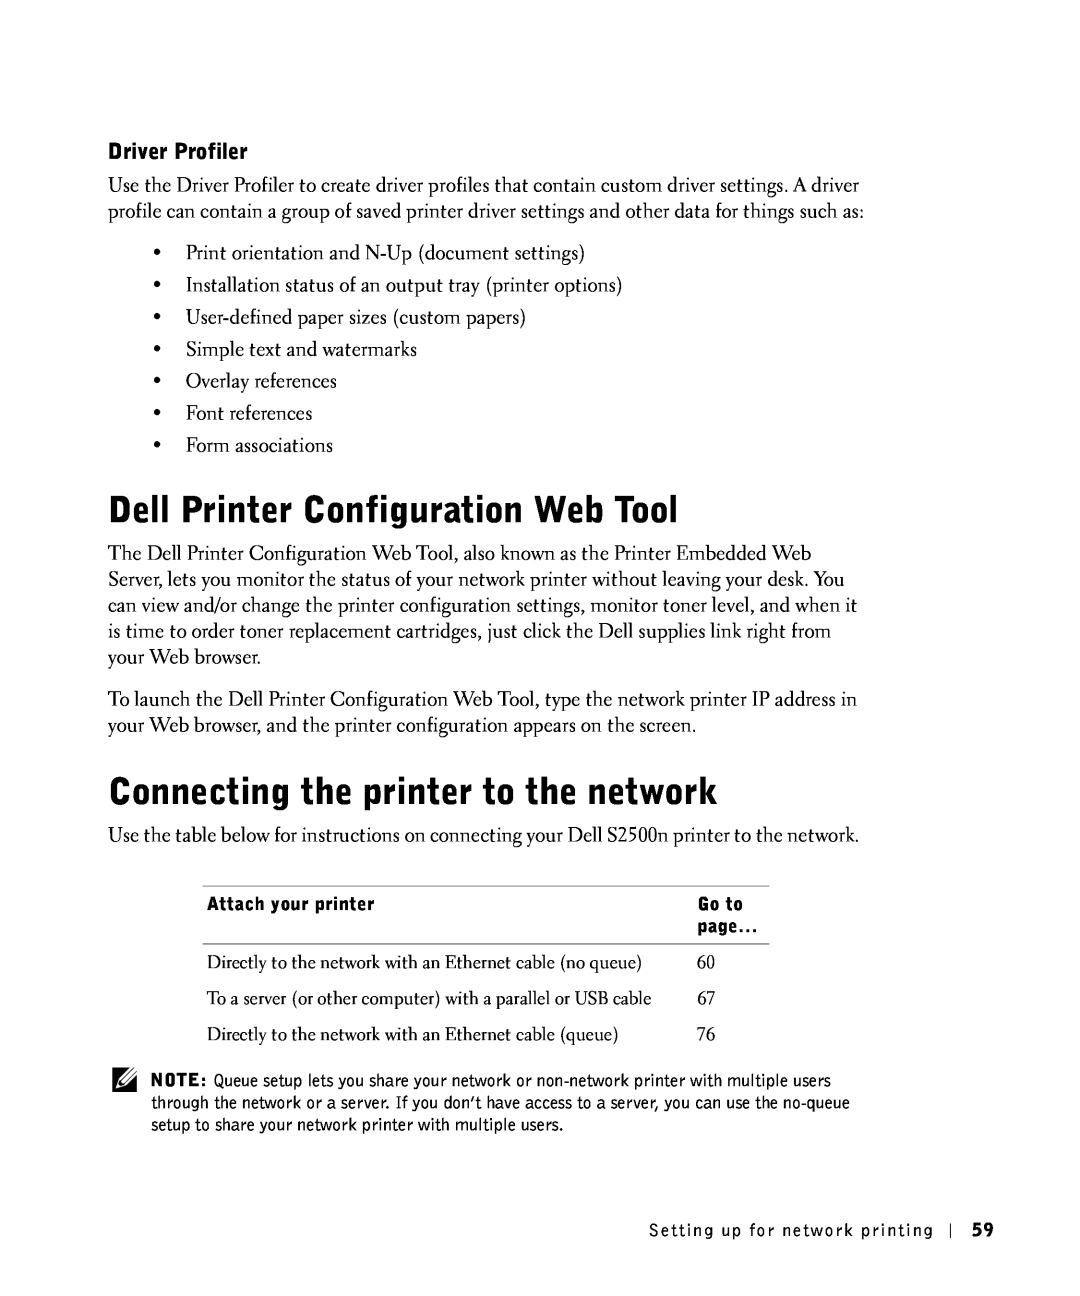 Dell S2500 owner manual Dell Printer Configuration Web Tool, Connecting the printer to the network, Driver Profiler 